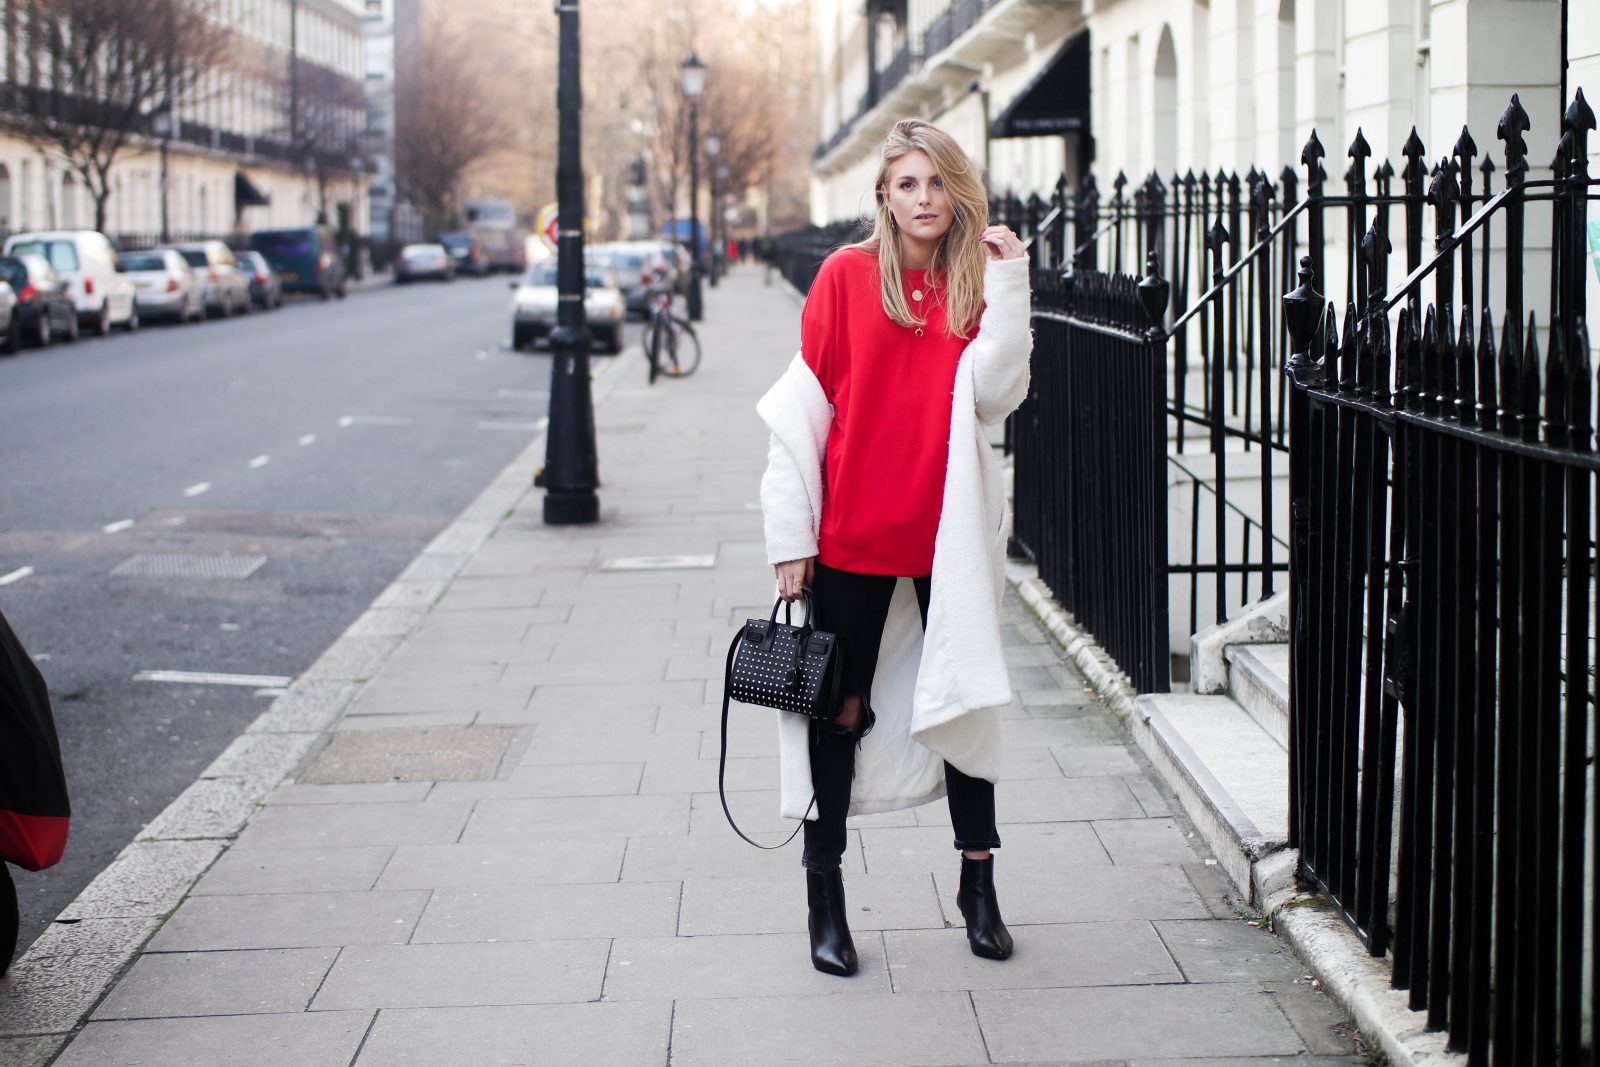 LFW DAY 2 - Red Alert - Fashion Blogger Style 